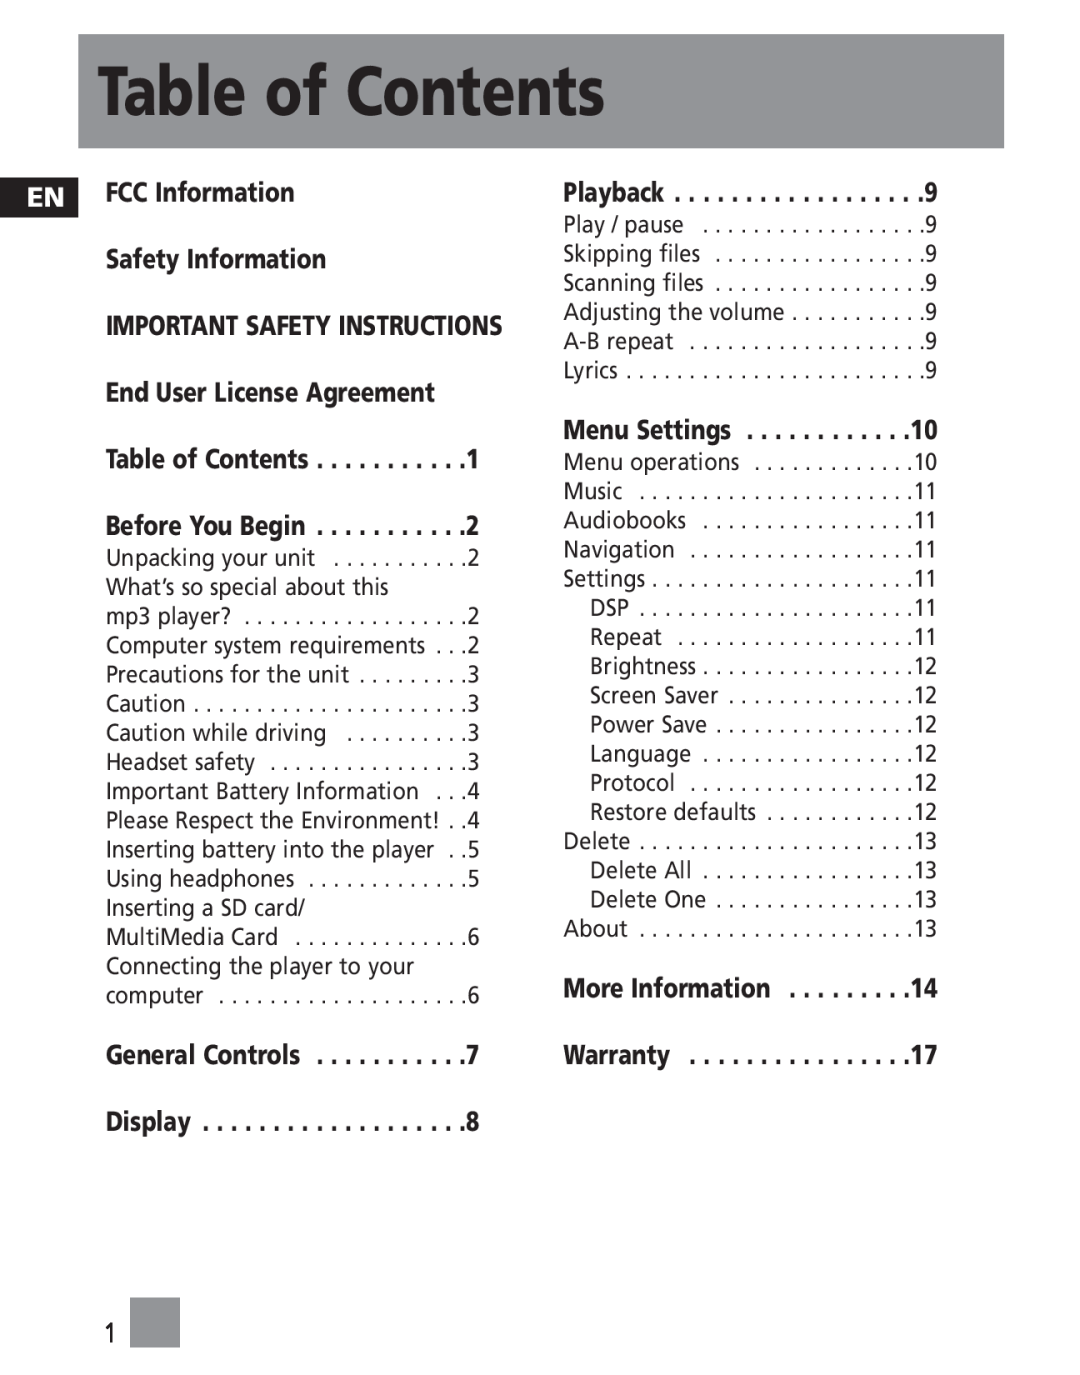 RCA MC2000 Table of Contents, EN FCC Information Safety Information IMPORTANT SAFETY INSTRUCTIONS, Playback, Menu Settings 